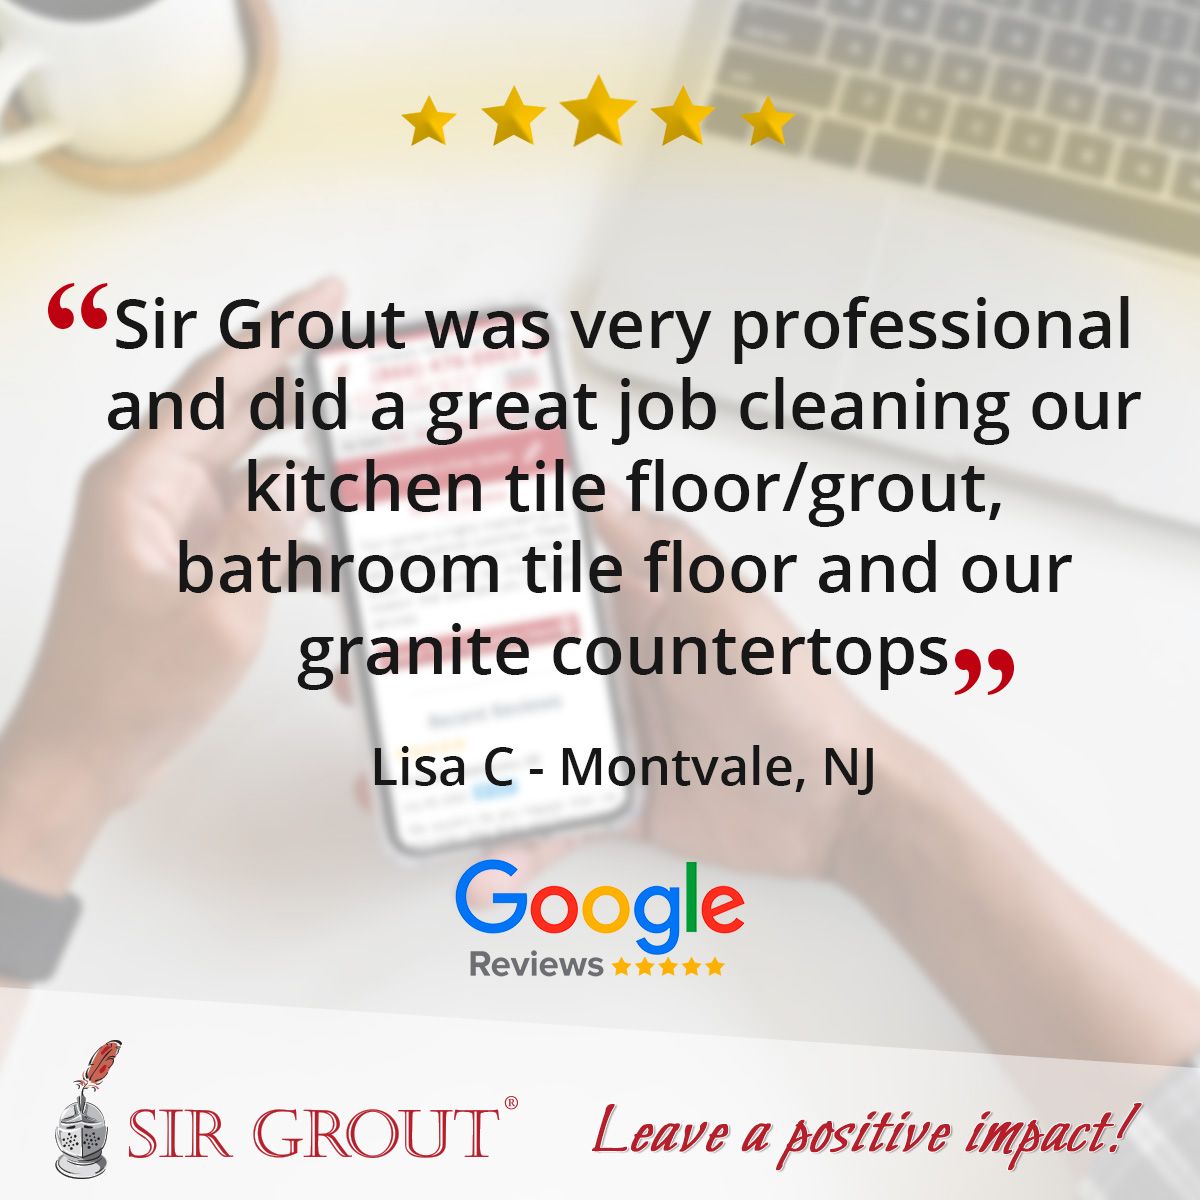 Sir Grout was very professional and did a great job cleaning our kitchen tile floor/grout, bathroom tile floor and our granite countertops